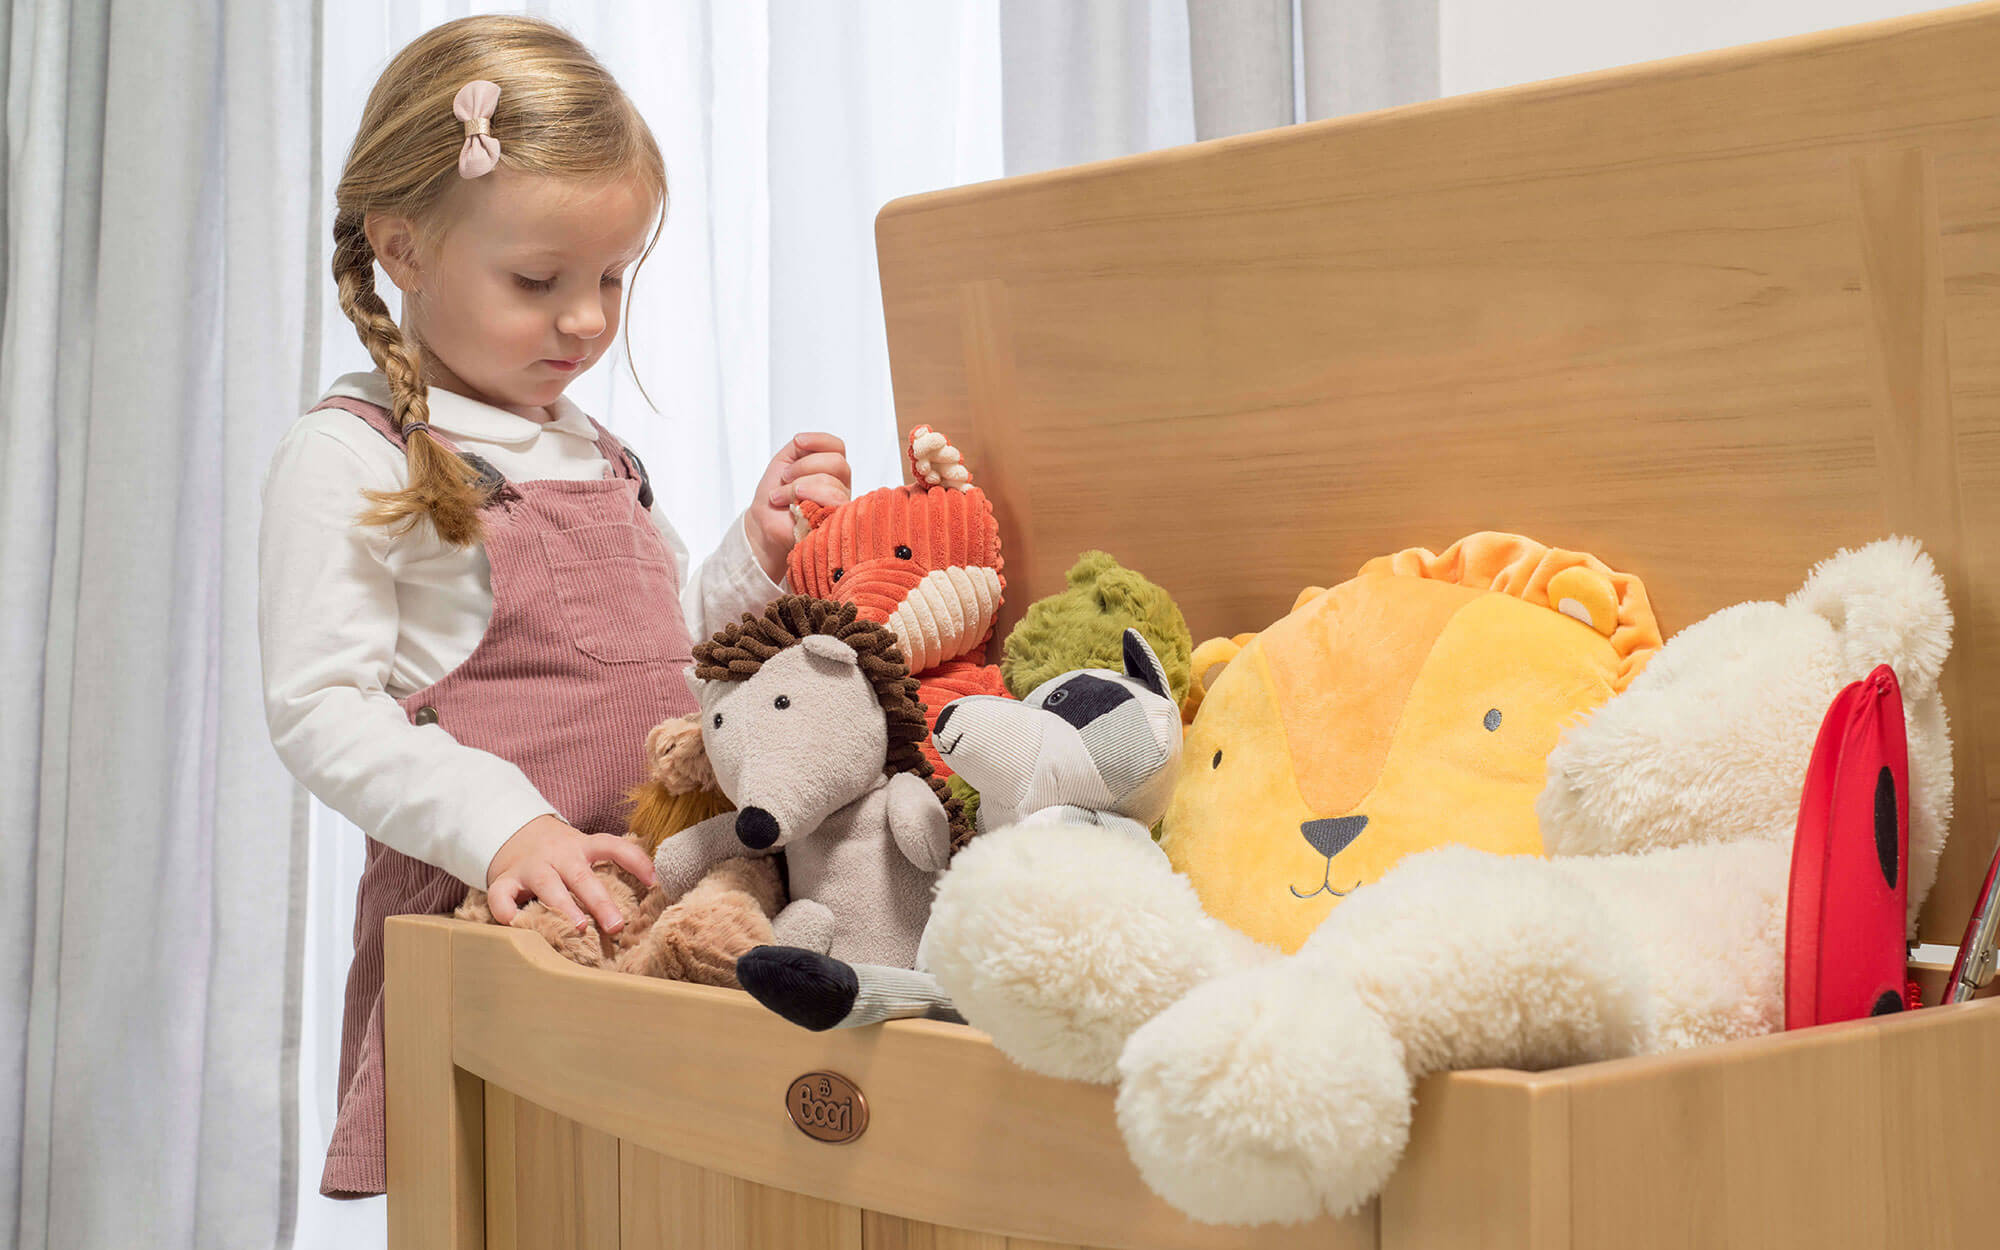 Girl looking into toy box